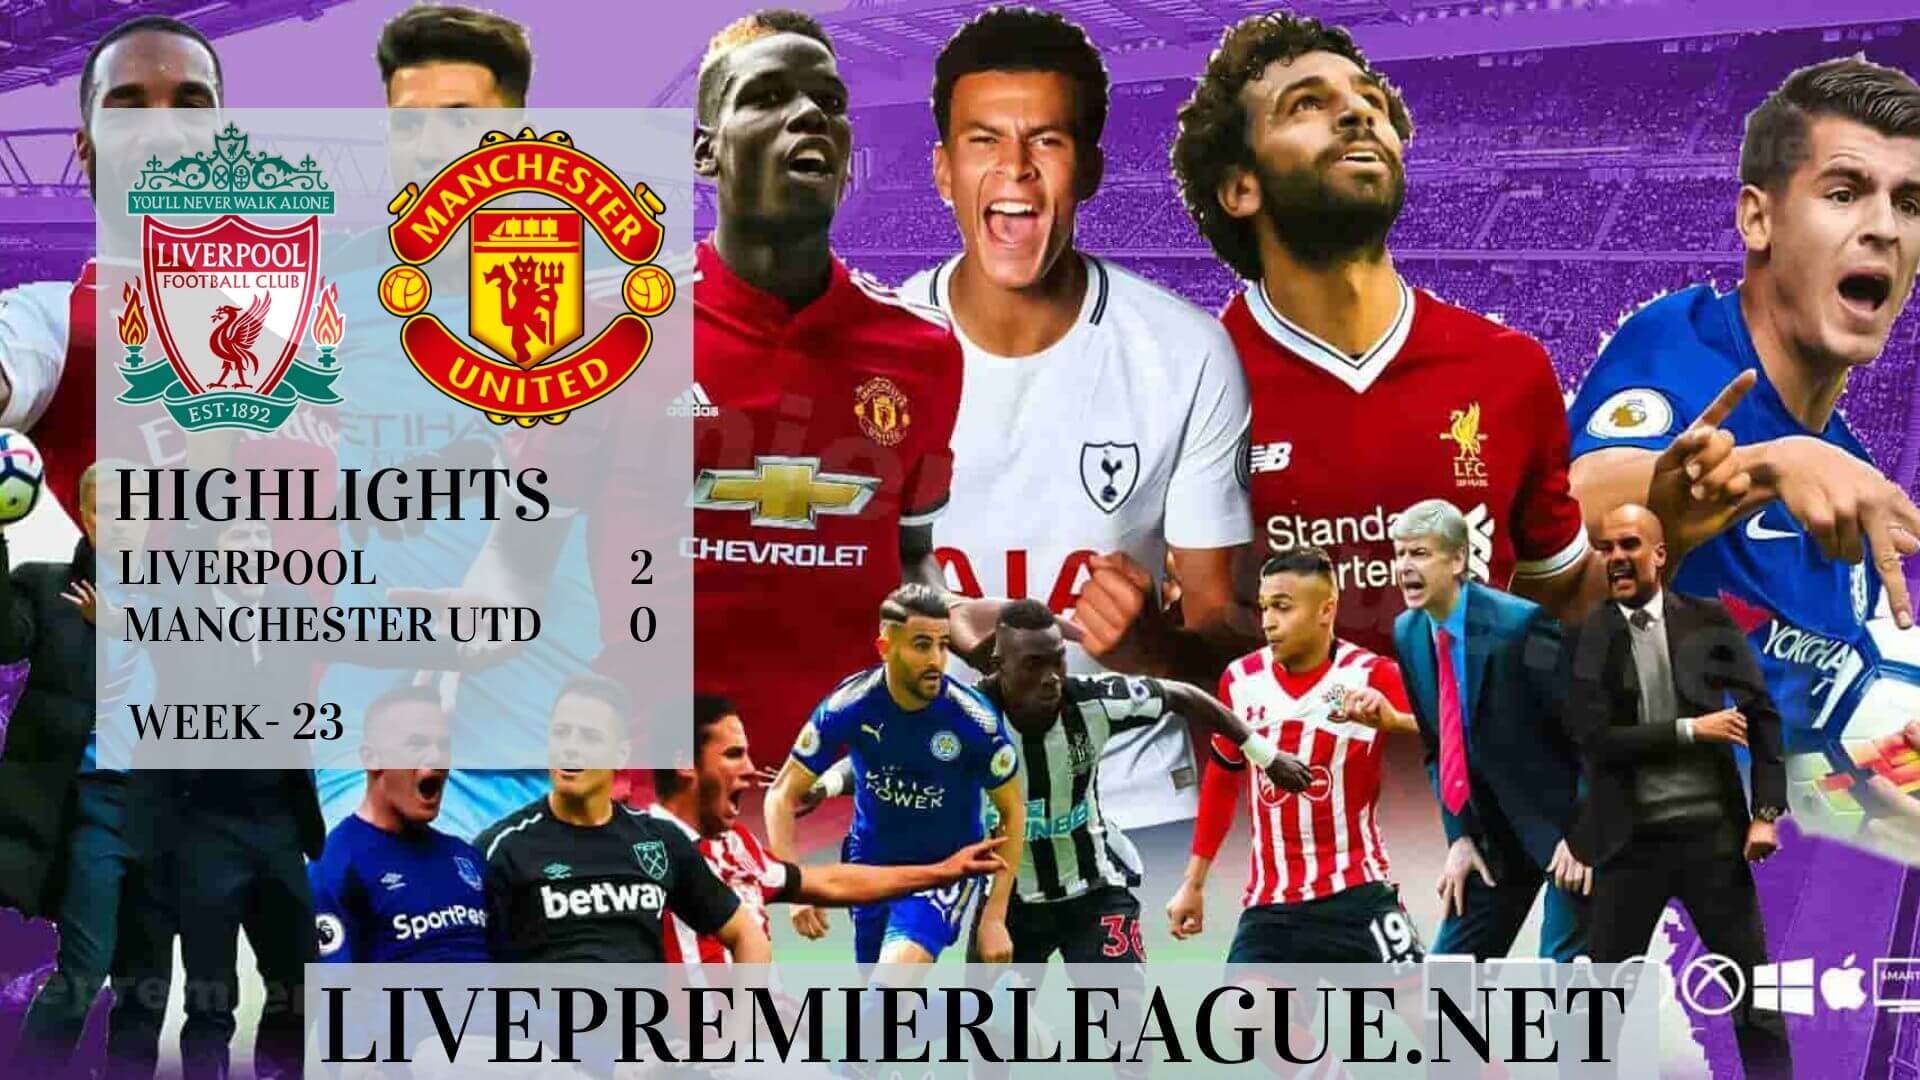 Liverpool Vs Manchester United Highlights 2020 Week 23